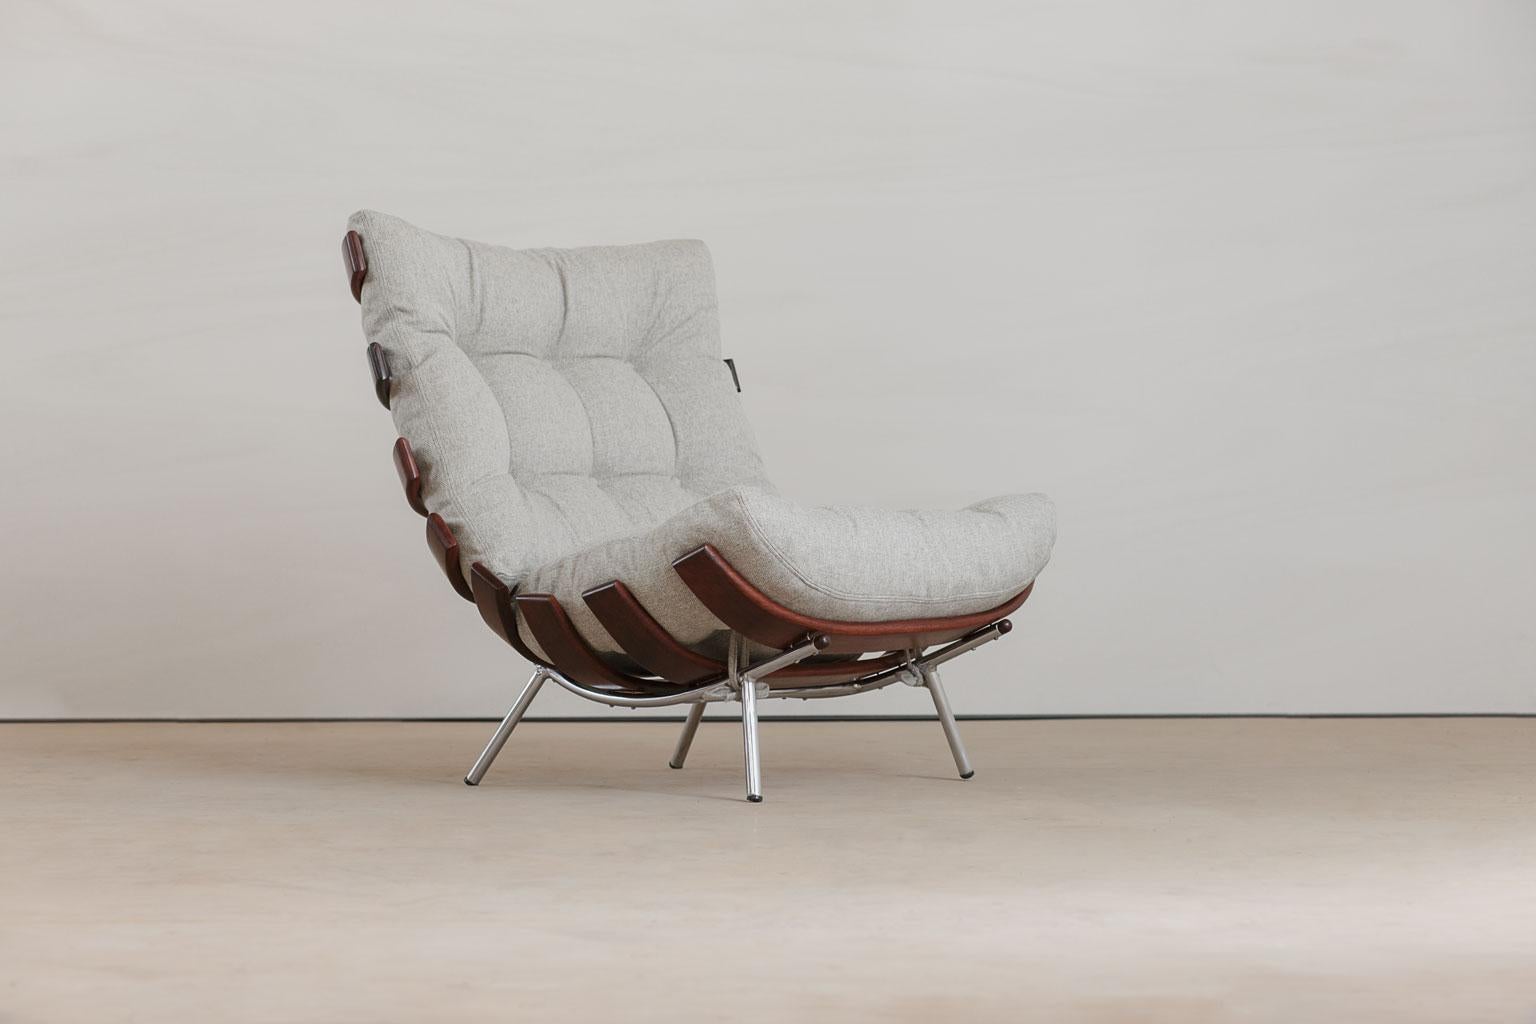 Rib chair (also called Costela chair) designed by Martin Eisler and Carlo Hauner in Brazilian Imbuia wood and chrome structure. These chairs are iconic Brazilian Mid-Century Modern pieces, circa 1950. The chair has been recently reupholstered in off